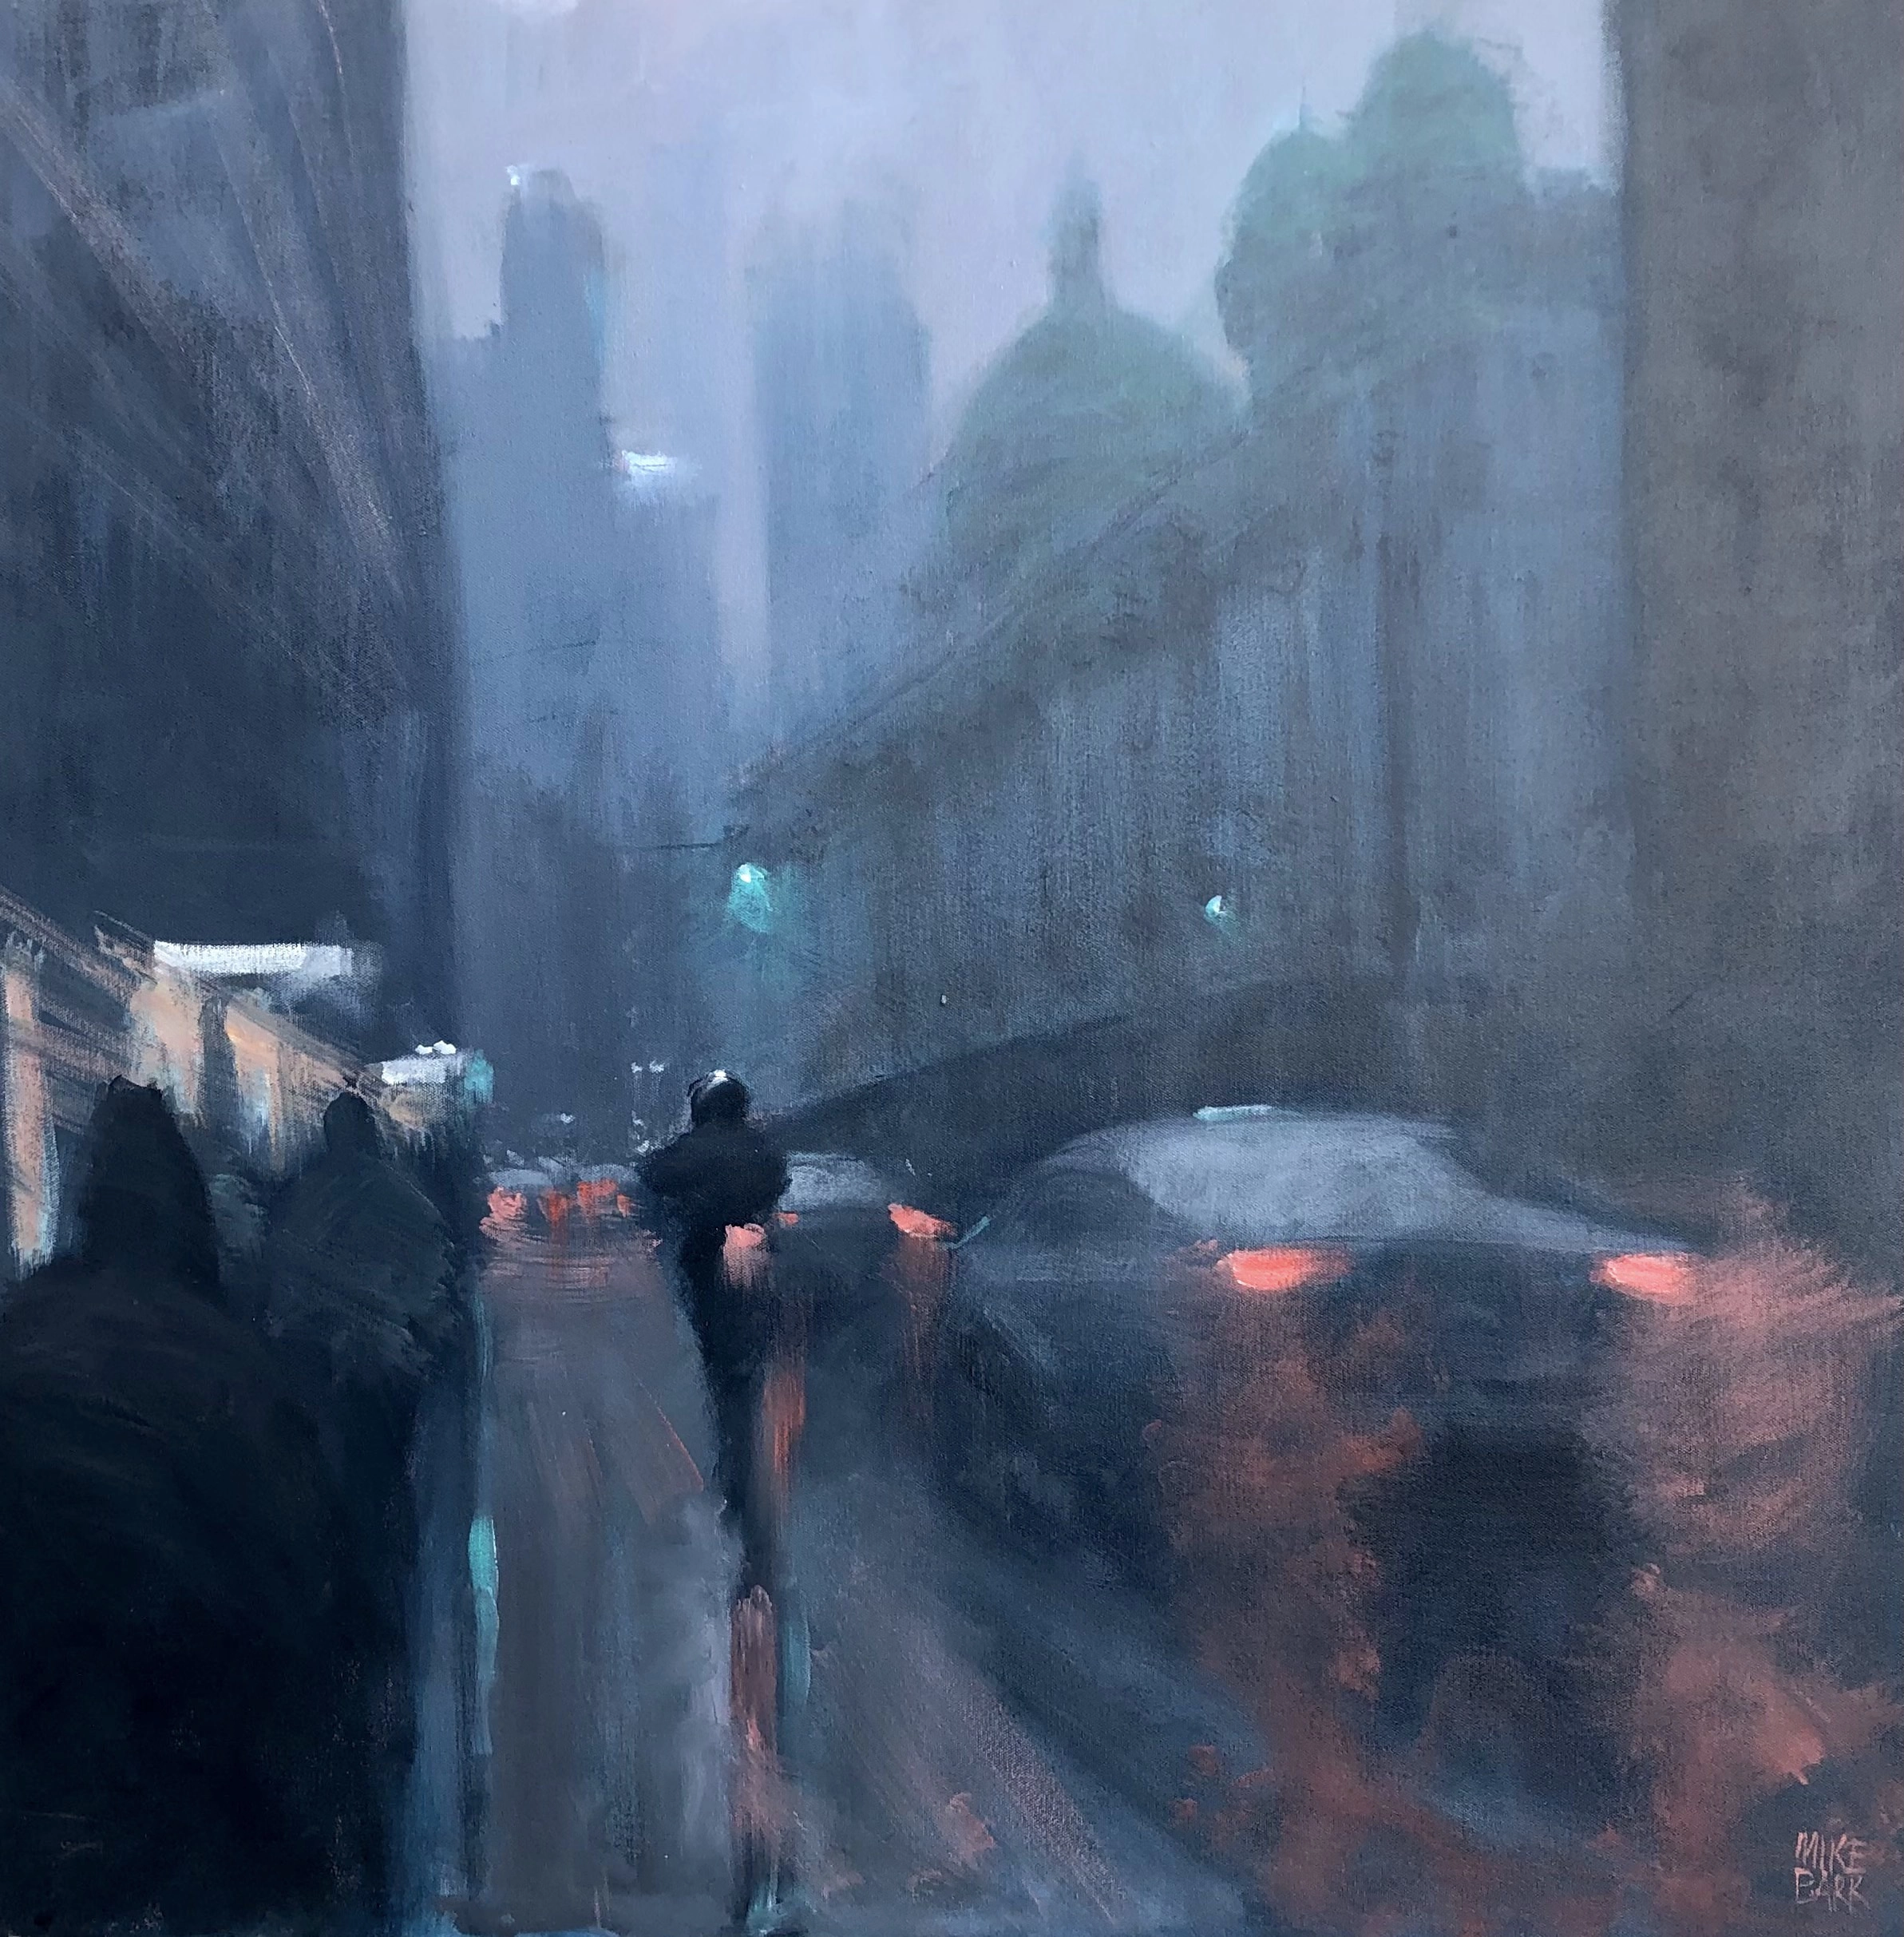 Mike Barr's "Motorbike on George st" Acrylic on Canvas artwork for sale